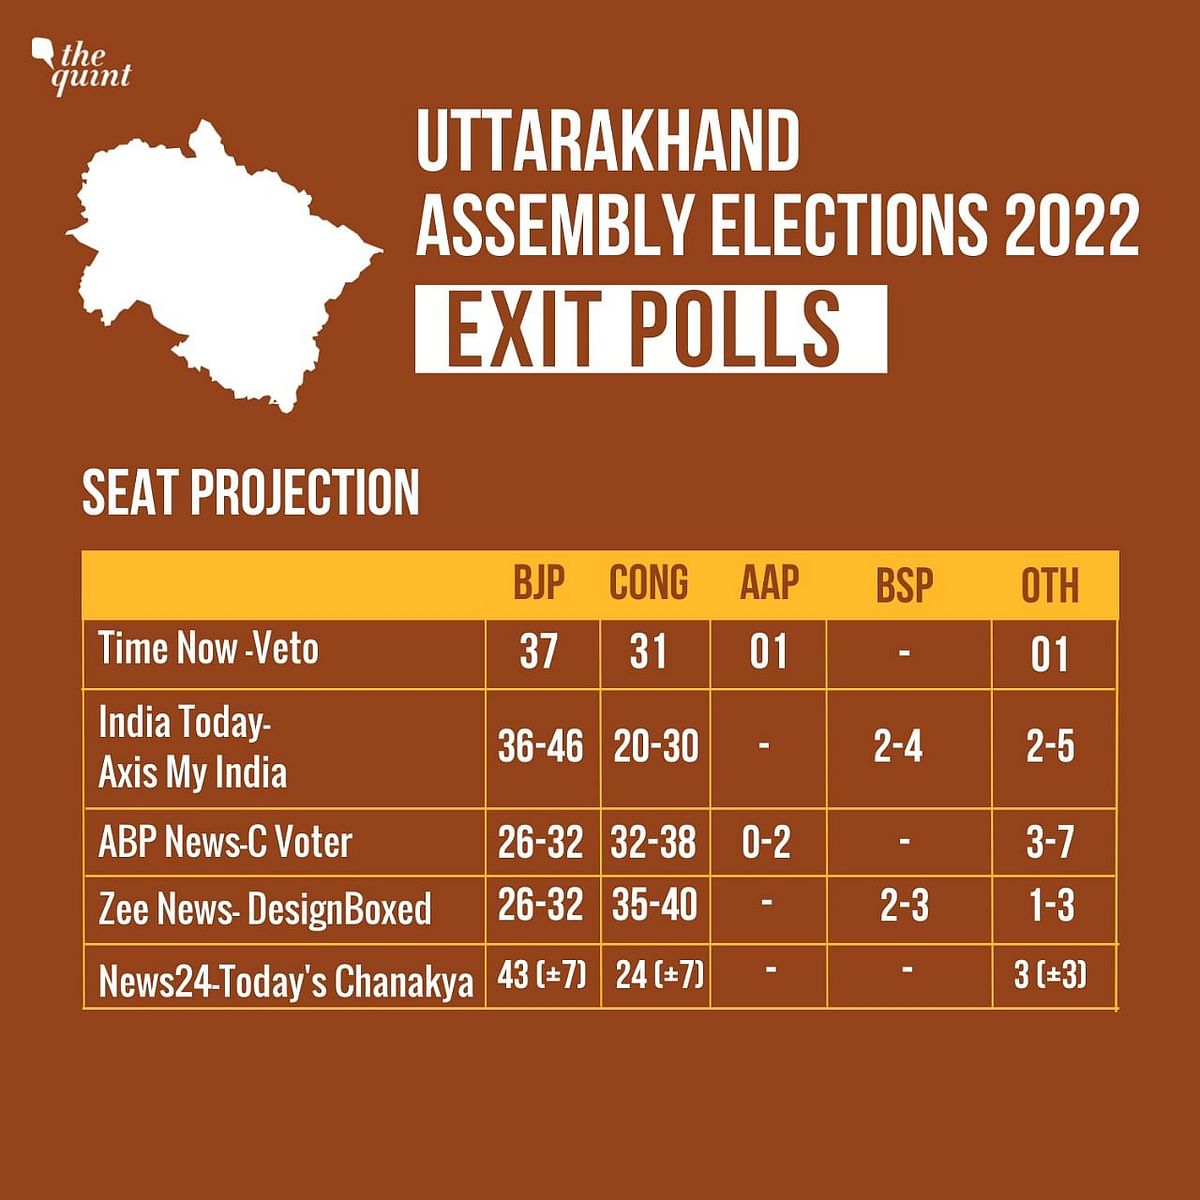 How accurate were the exit polls in predicting the outcomes for Punjab, UP, Goa, and others in last election?